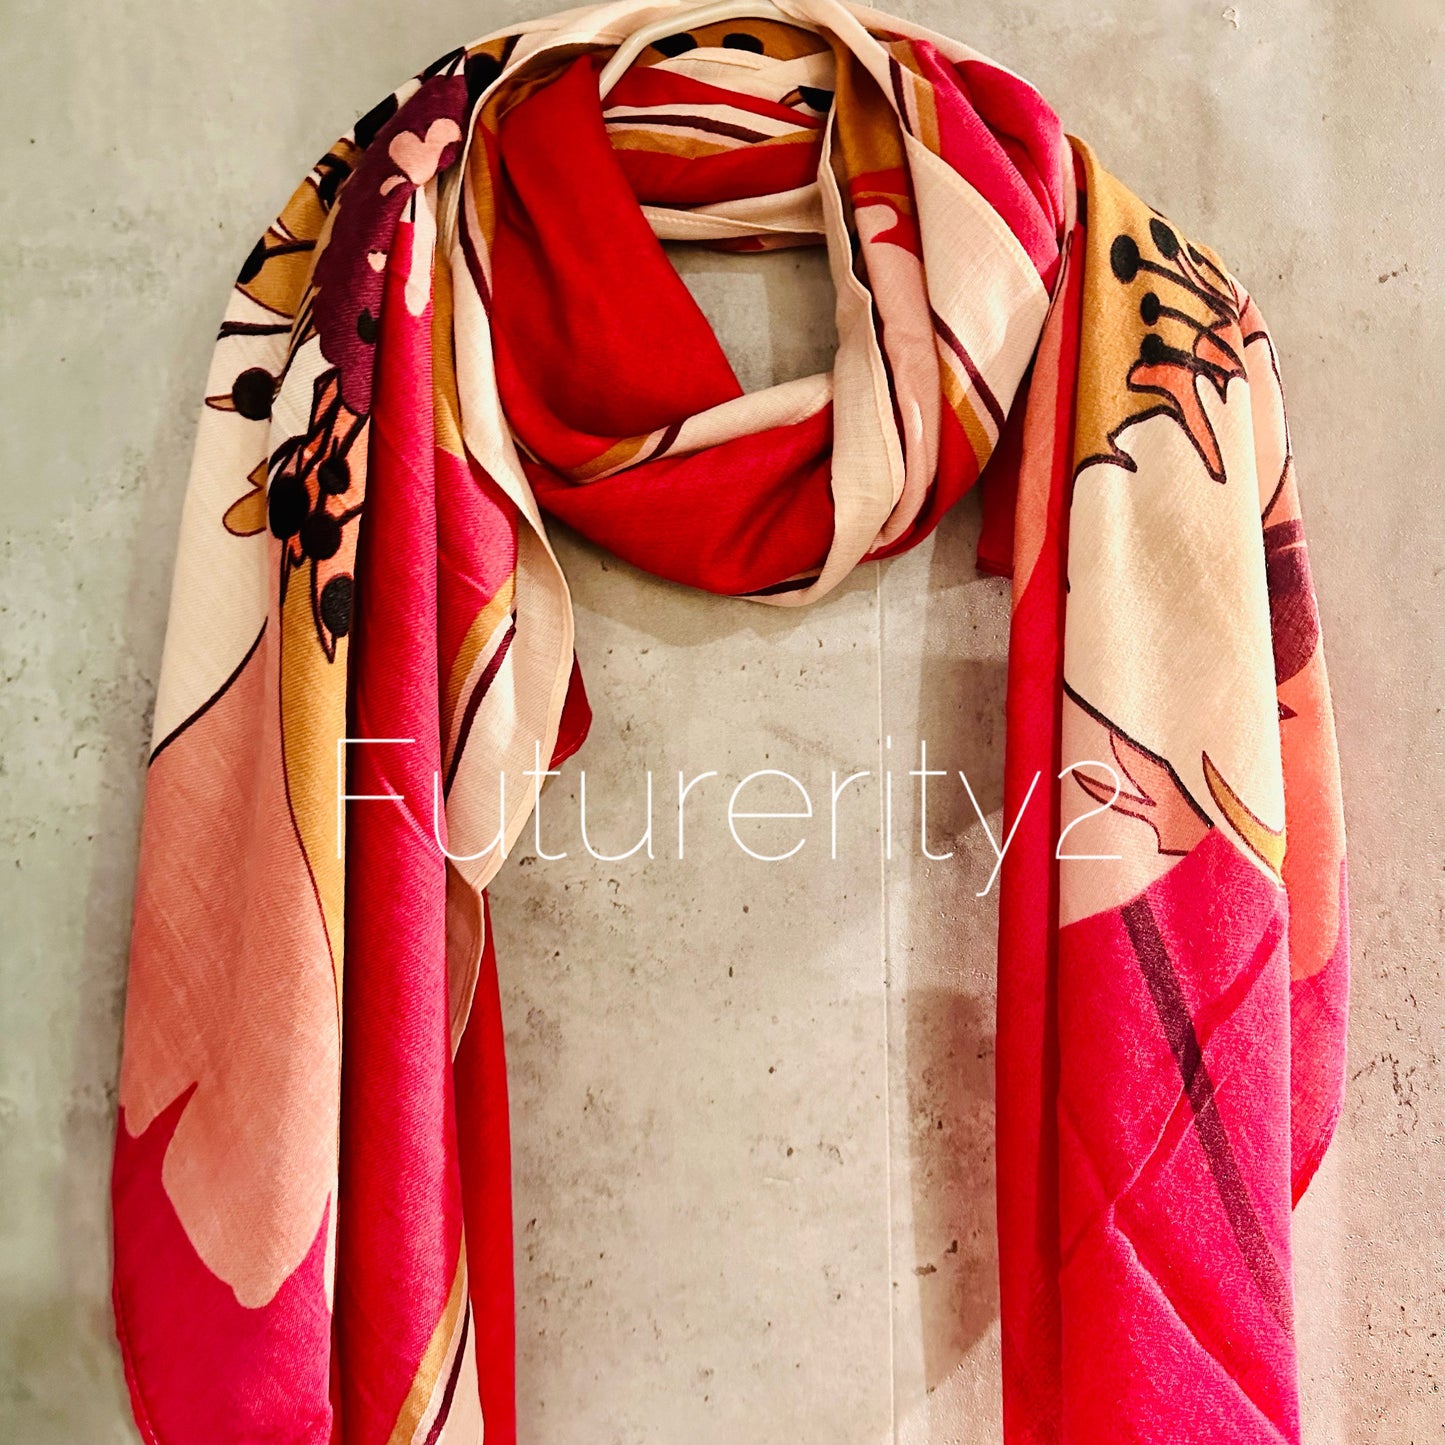 Bright Pink Organic Cotton Scarf with Huge Sketched Peony Flower – An Eco-Friendly Gift for Mom on Any Occasion